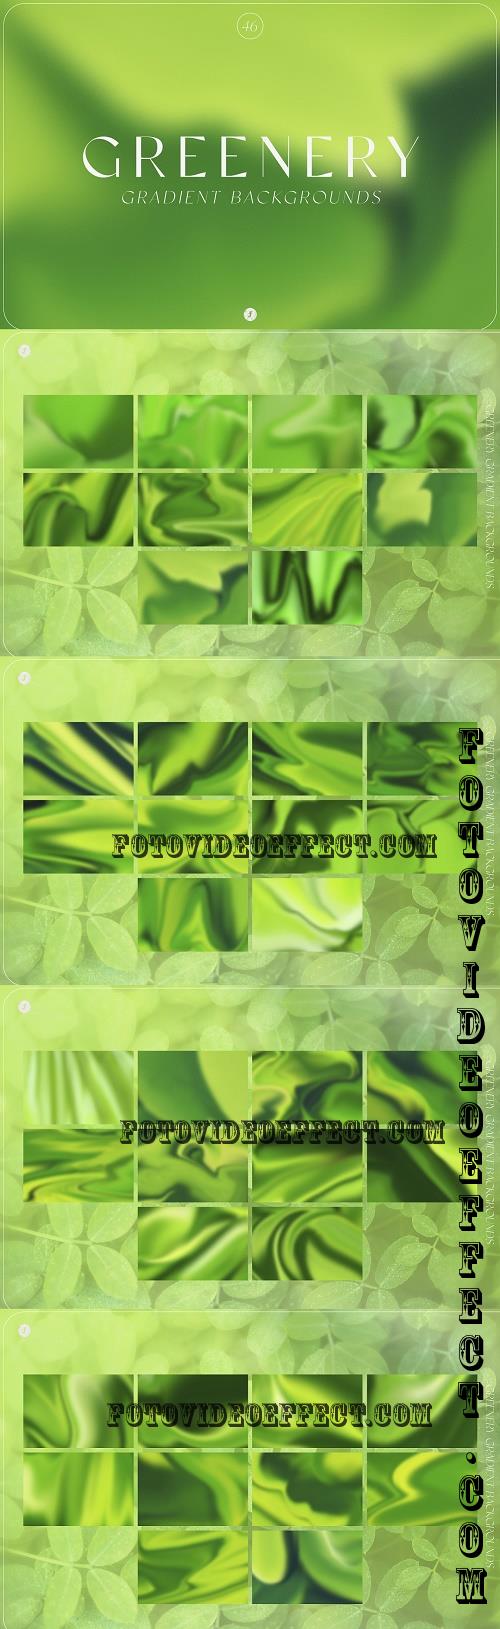 Greenery Gradient Backgrounds - 13456209